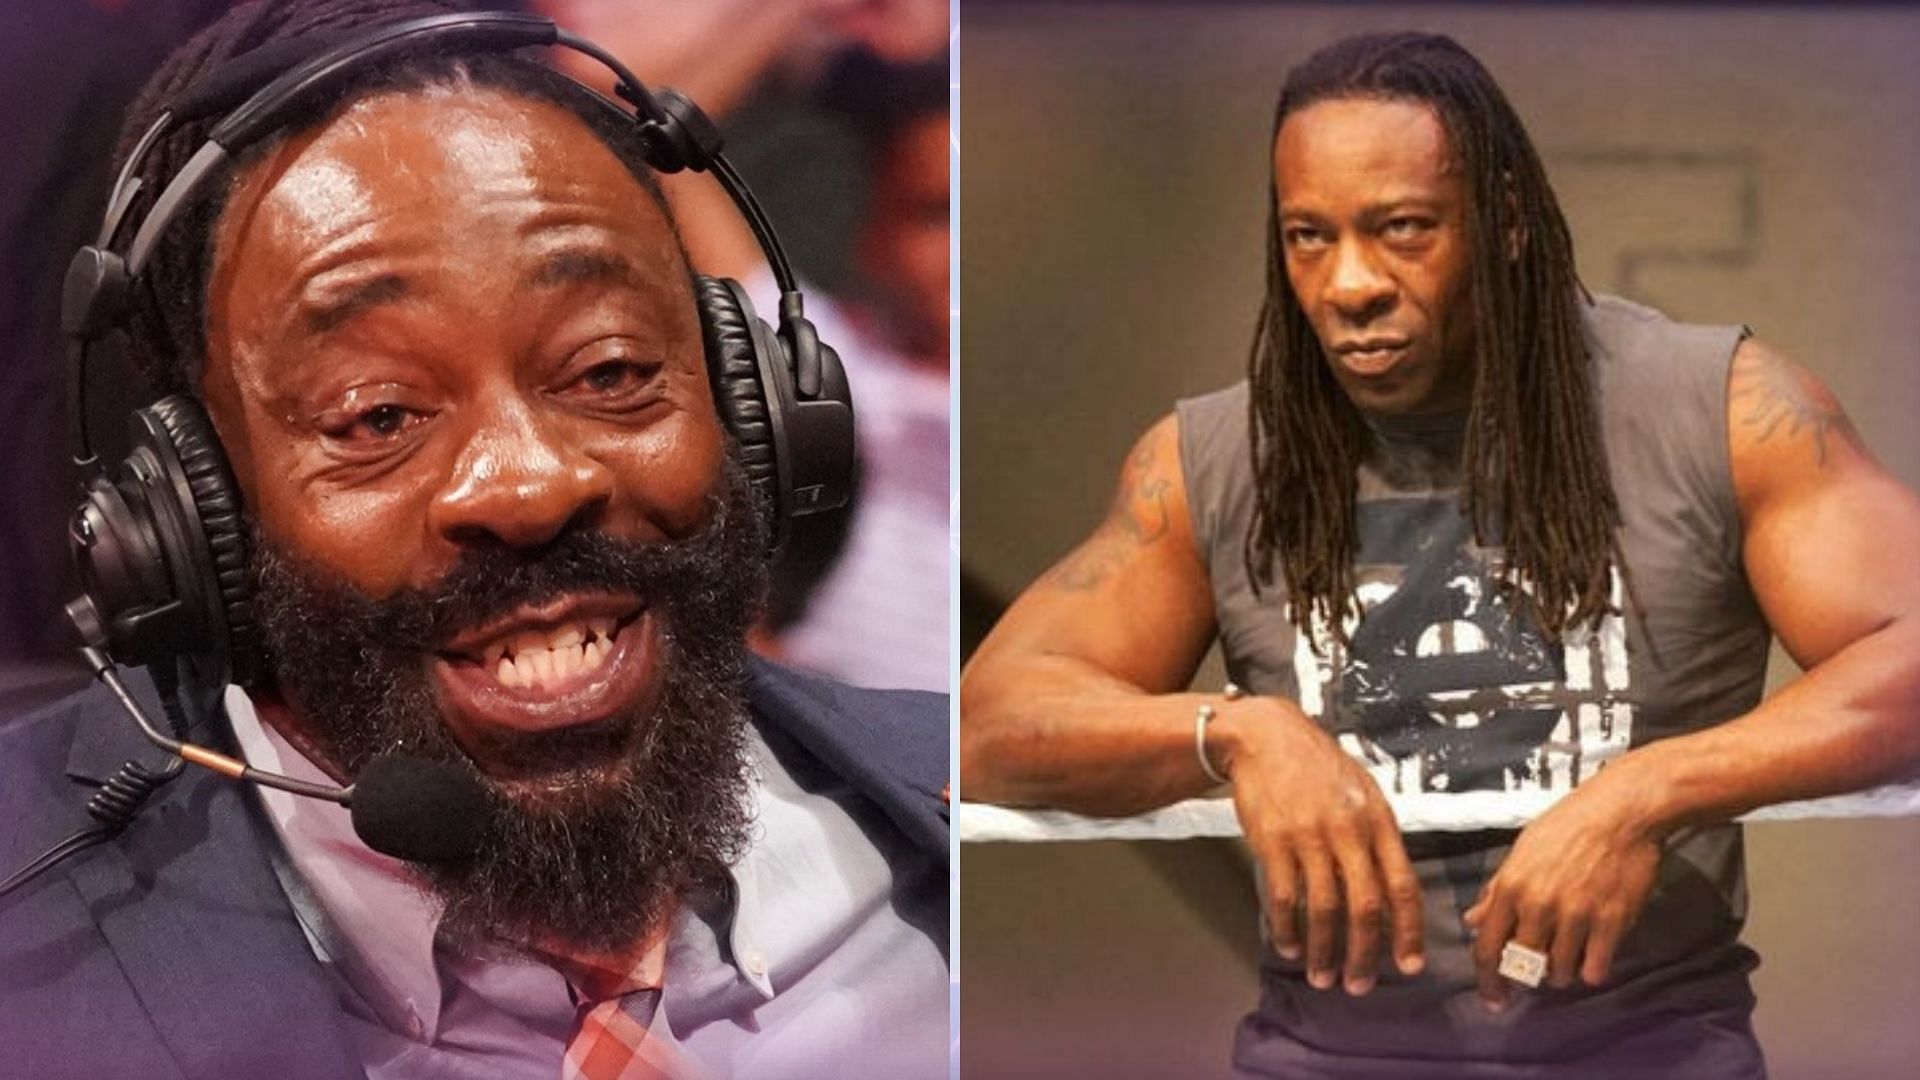 Booker T is a legendary wrestler with a prolific career